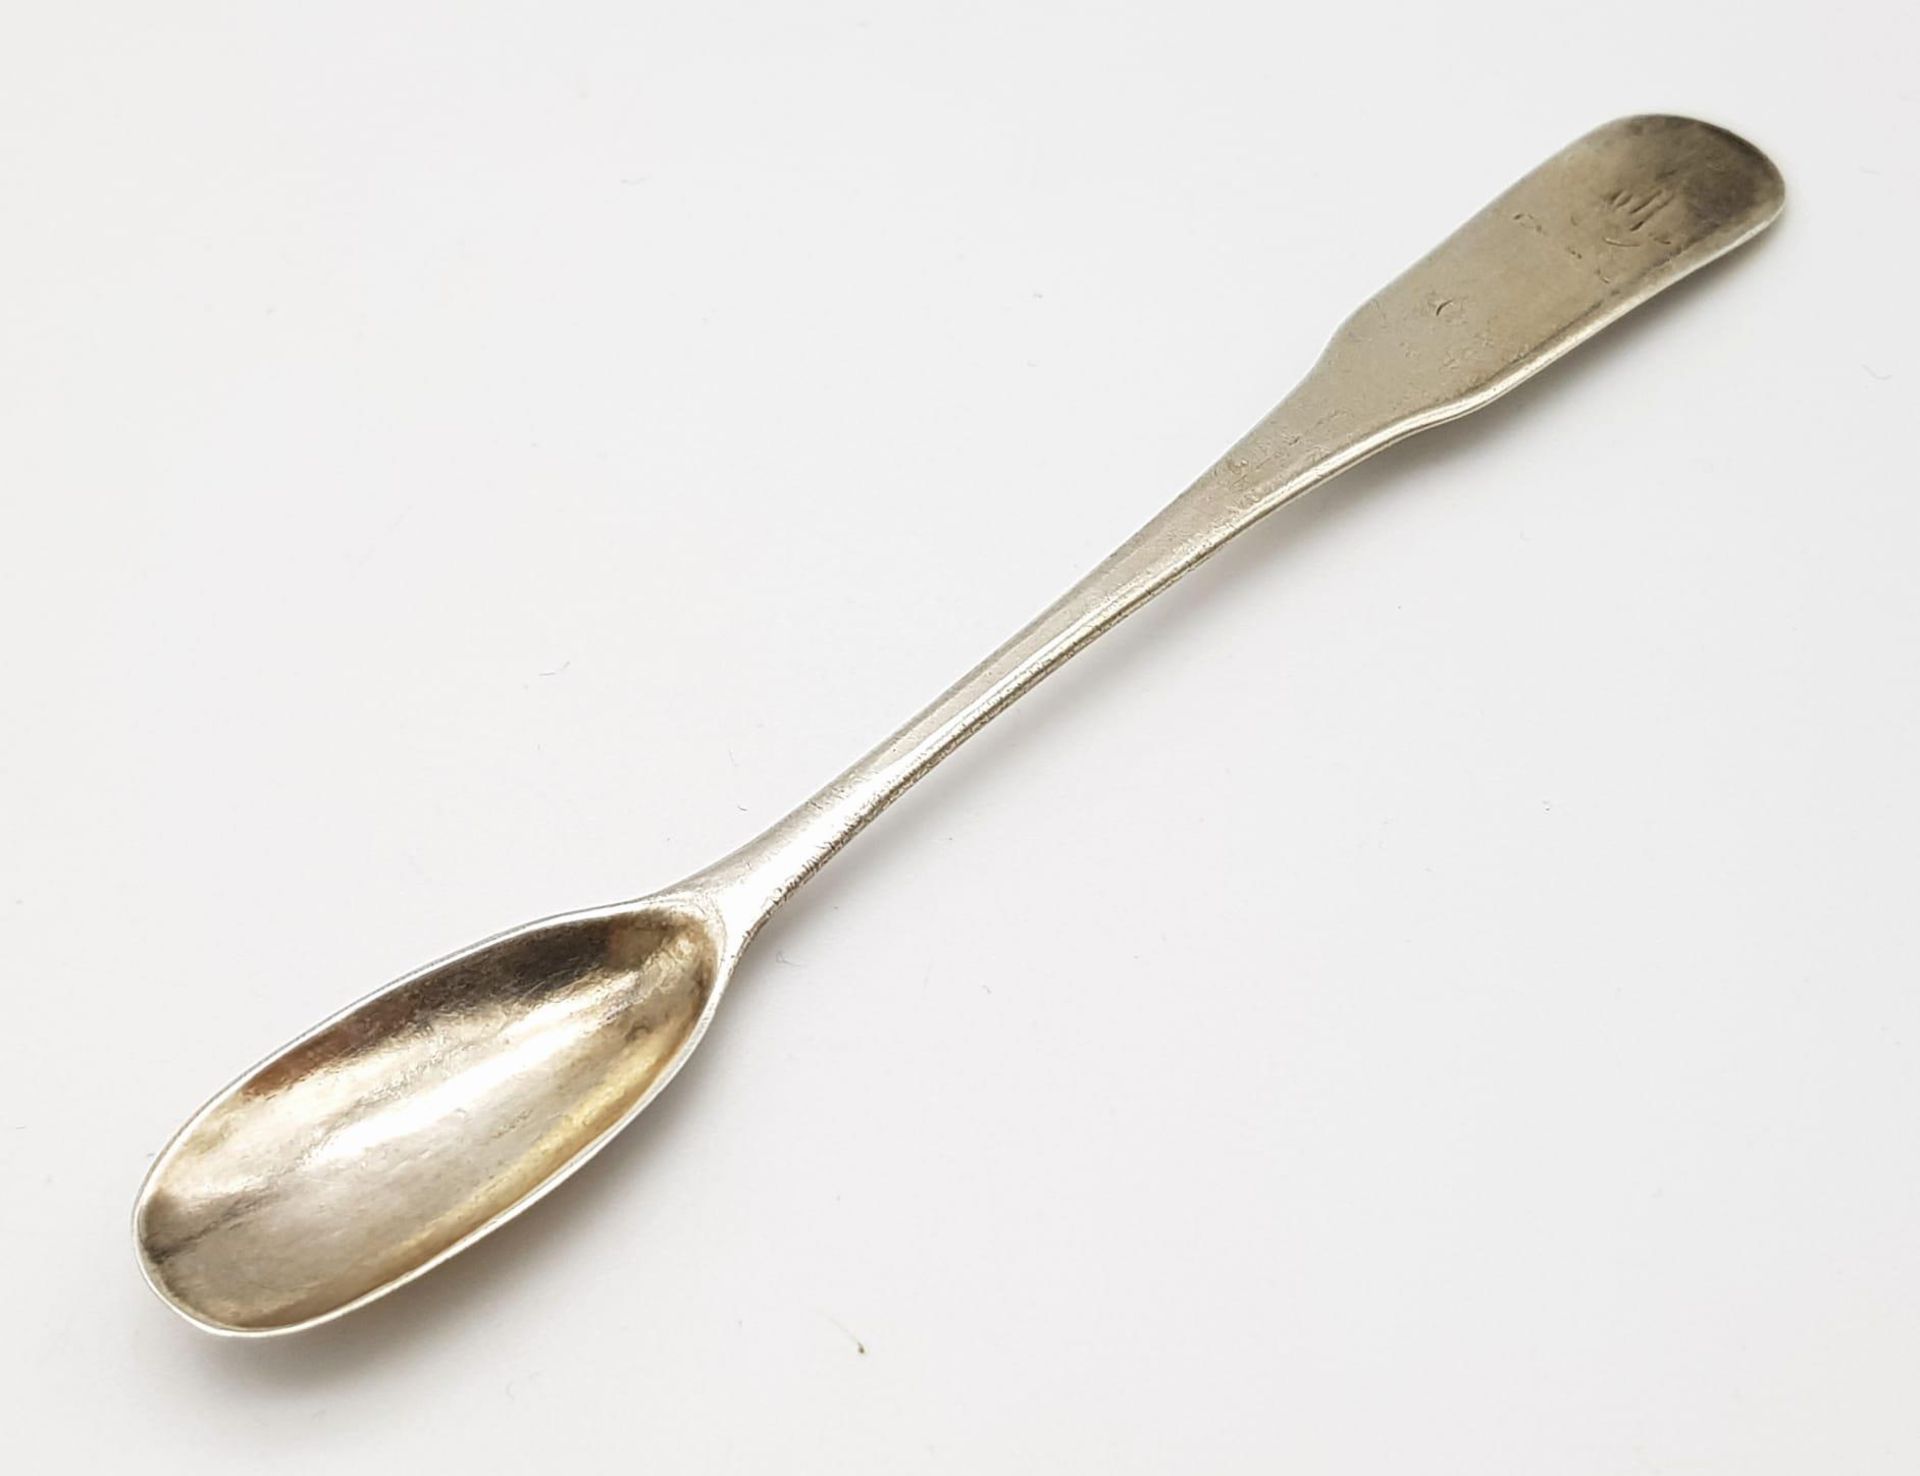 A VINTAGE SNUFF SPOON MADE BY PAYNE AND SONS OF OXFORD LATER USED BY ROCK STARS FOR OTHER SUBSTANCES